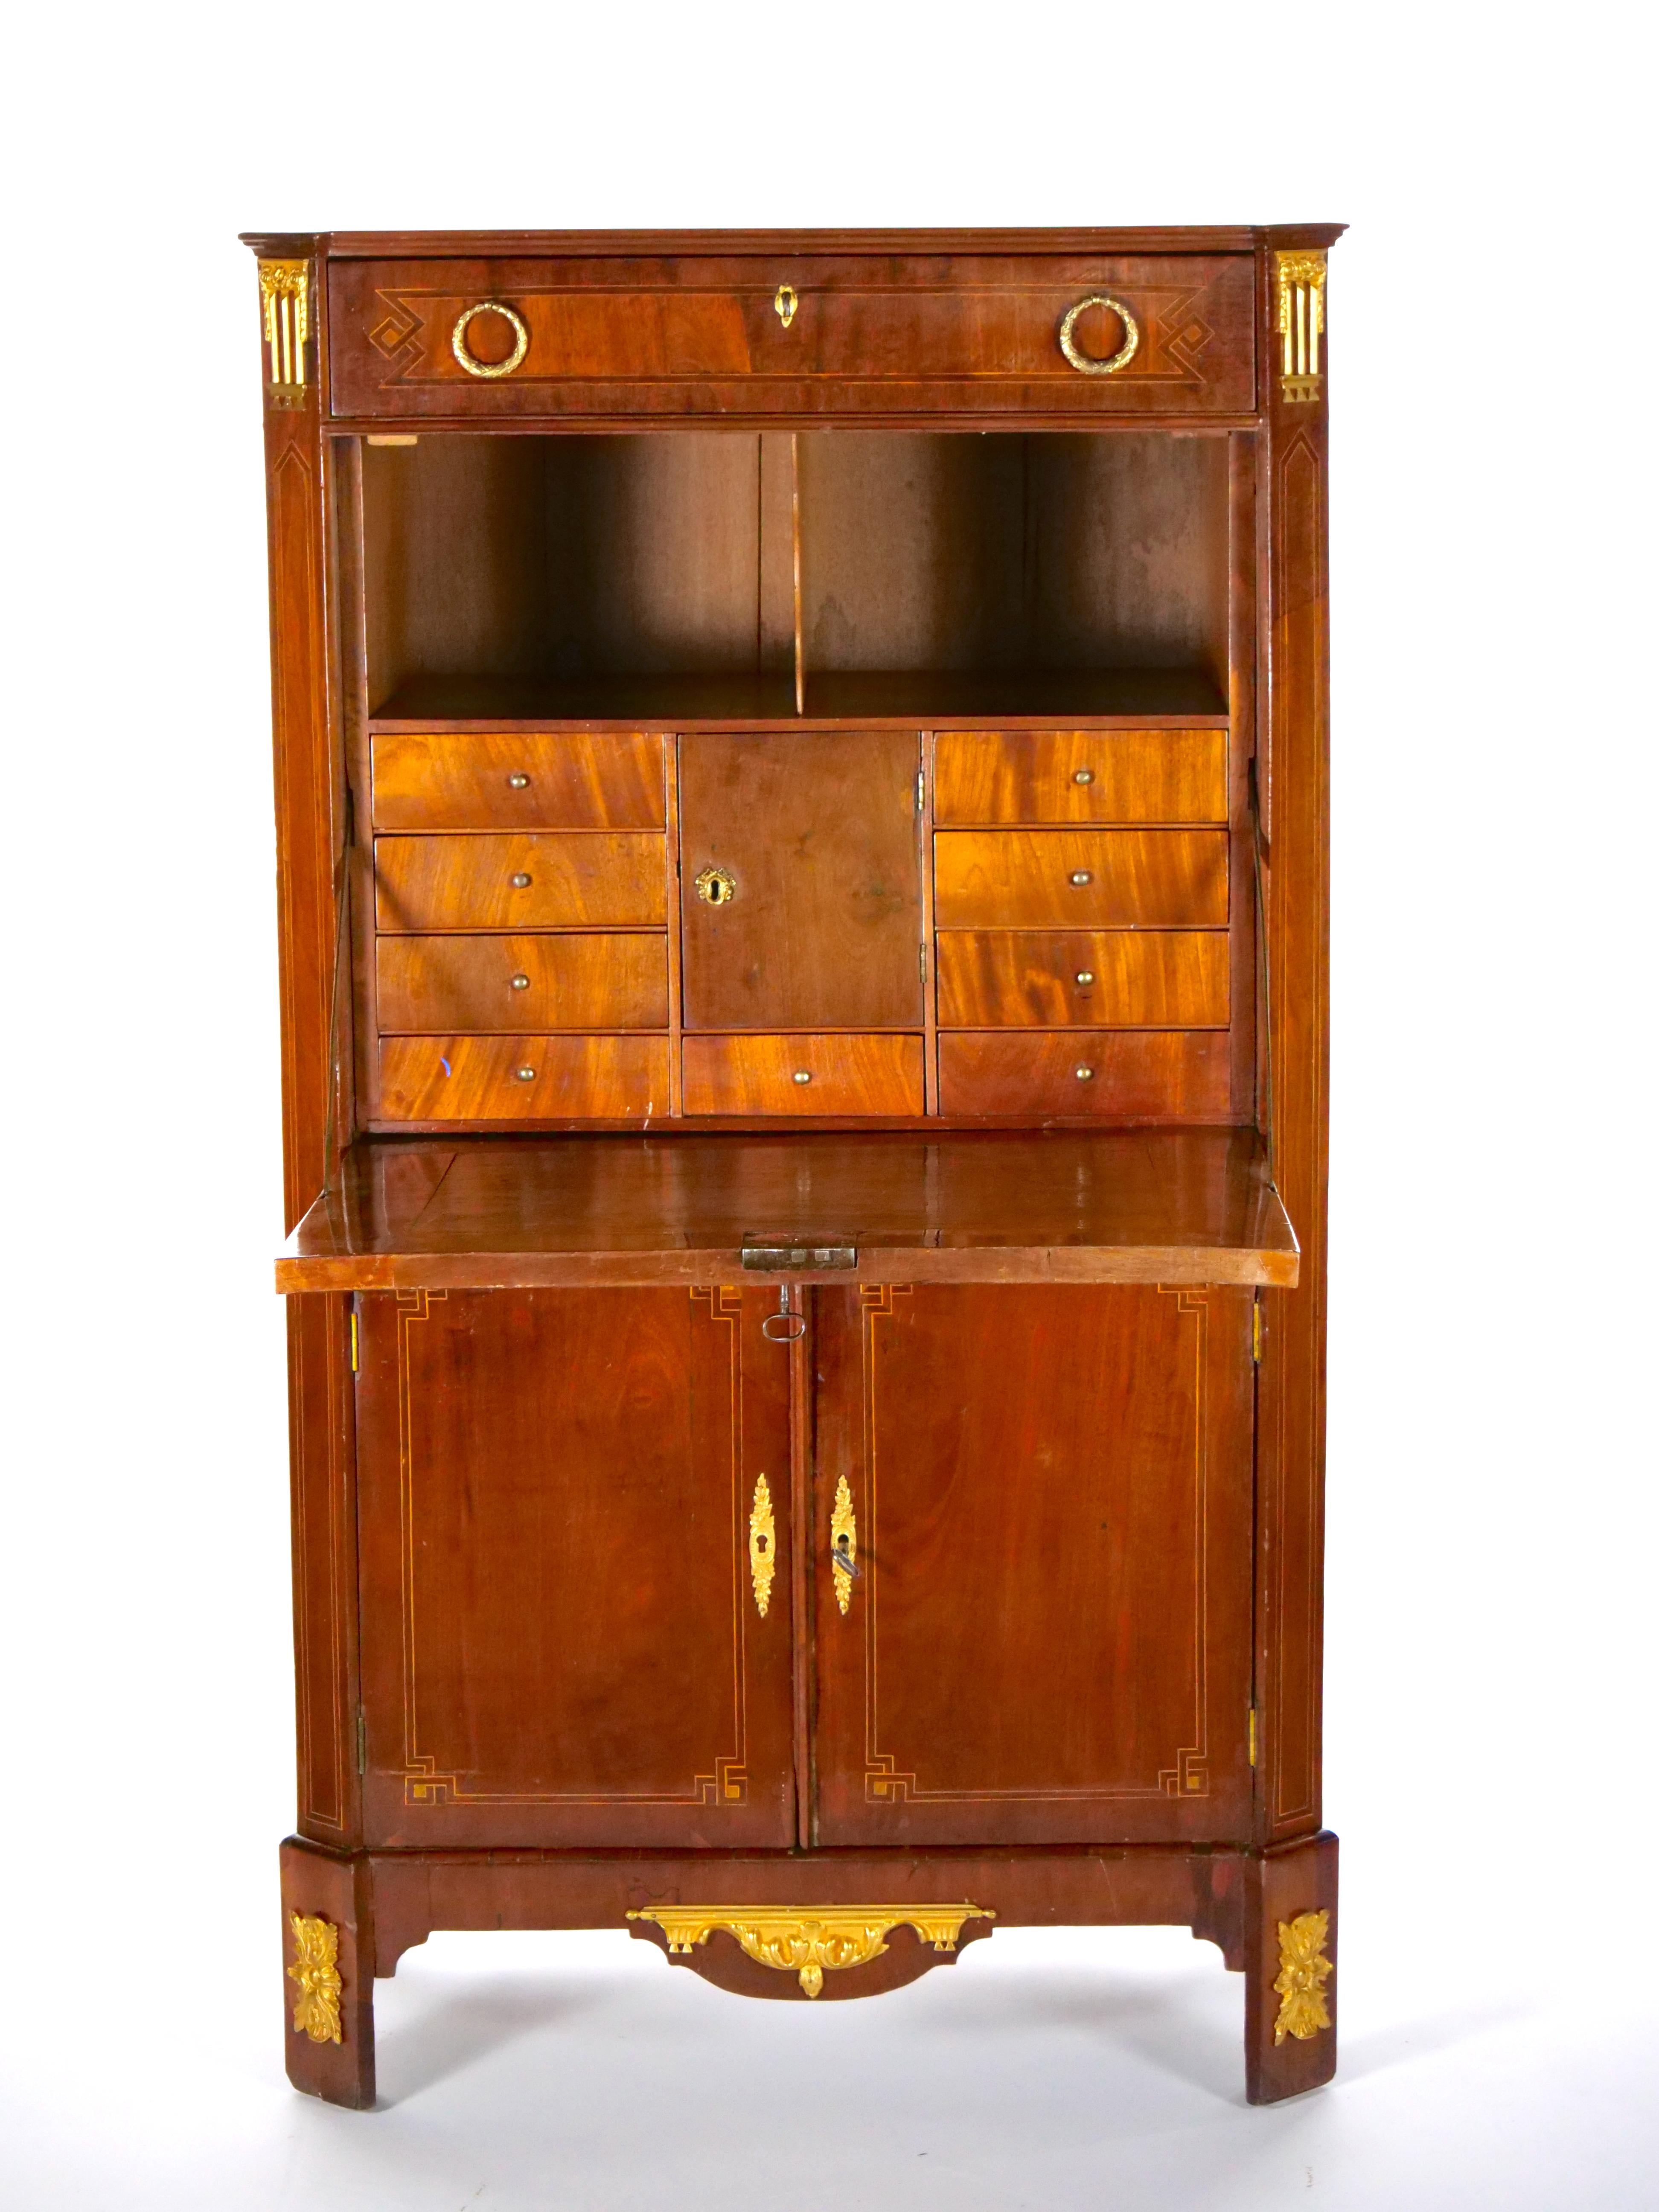 19th century mahogany wood neoclassical style bronze ormolu mounted secretary. The secretary is raised on tapered feet mounted bronze ormolu. The center section is fitted with a paneled cylinder opening to a pullout leather insert writing desk